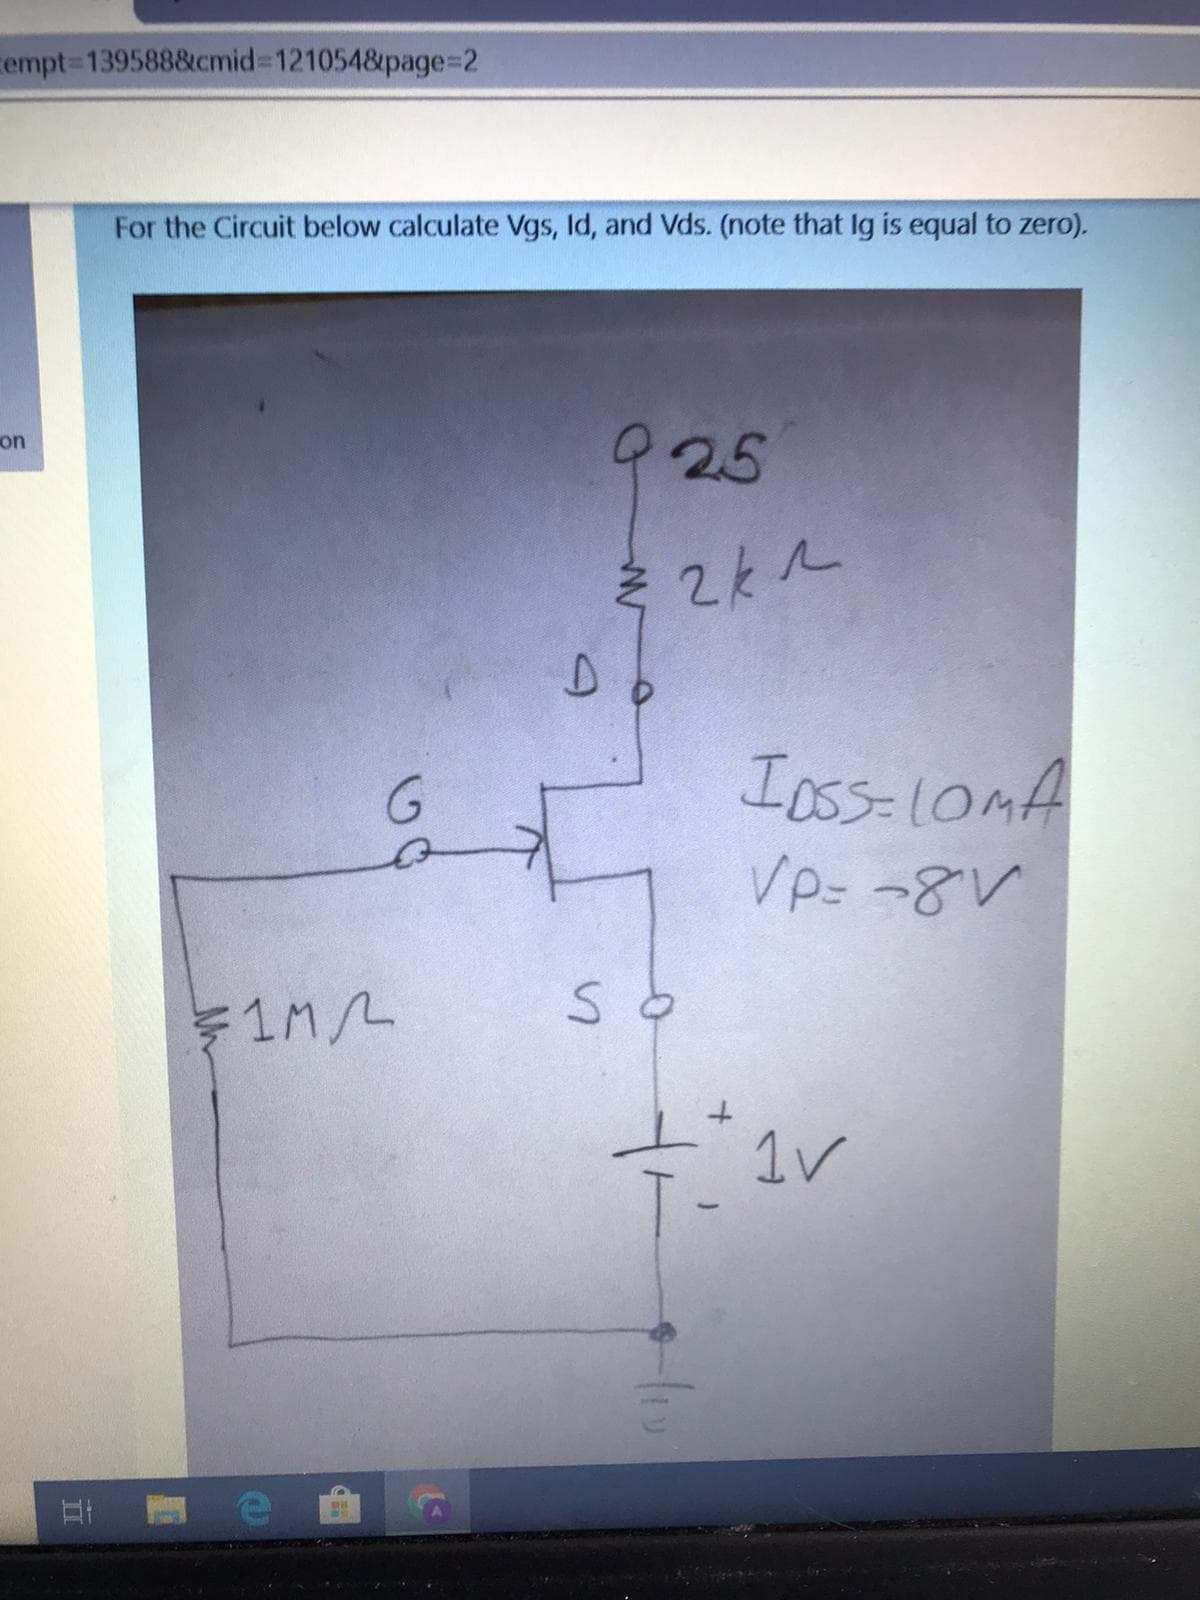 For the Circuit below calculate Vgs, Id, and Vds. (note that Ig is equal to zero).
925
Ioss=10MA
Vp= -8V
늘 1n/L
